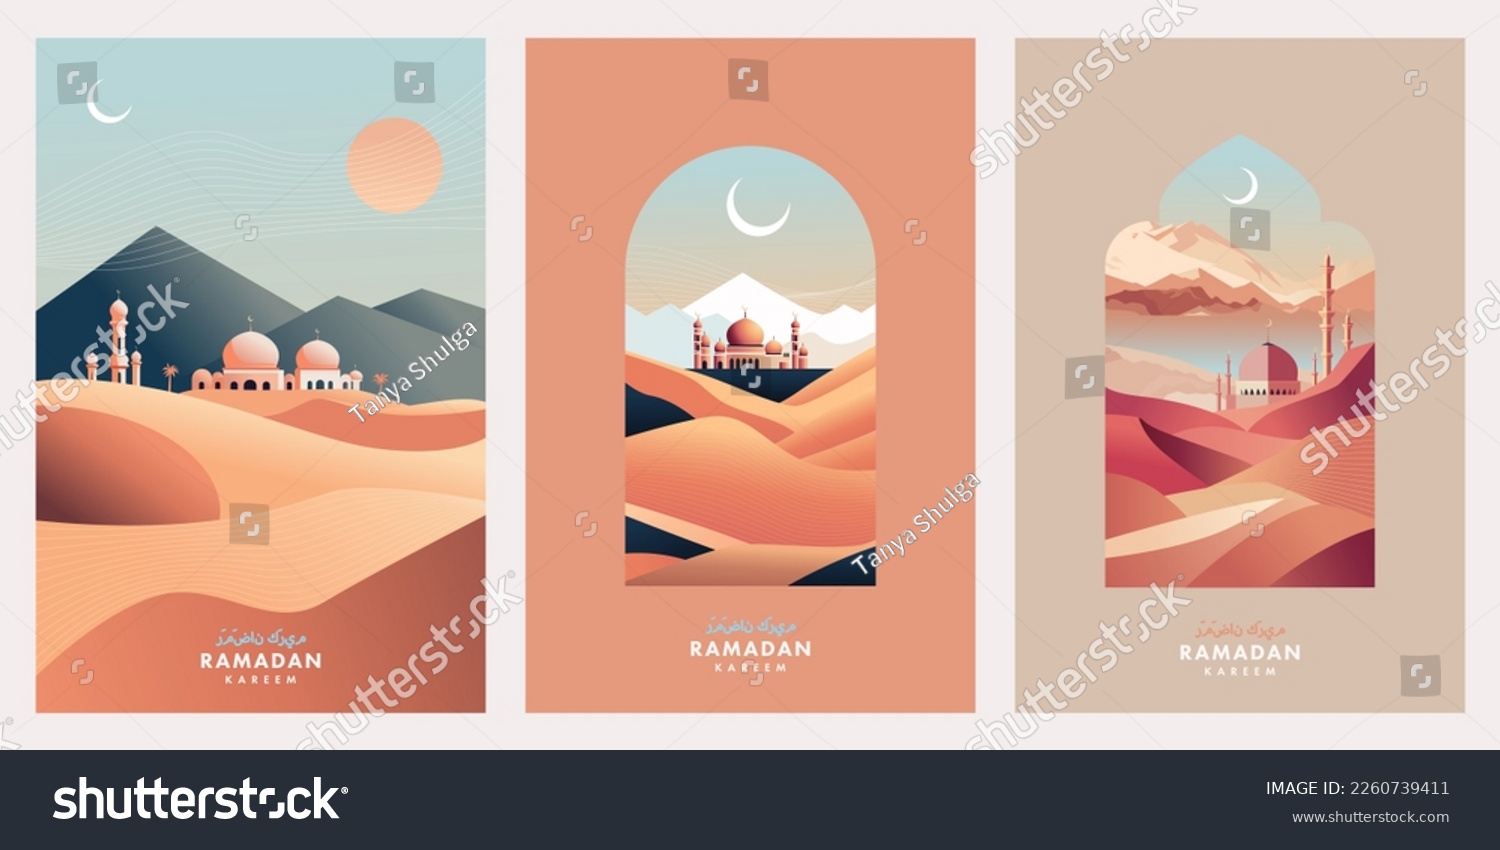 SVG of Ramadan Kareem Set of posters, cards, holiday covers. Arabic text translation Ramadan Kareem. Modern beautiful design in pastel colors with mosque, moon crescent, dune sands, mountains, arches windows svg